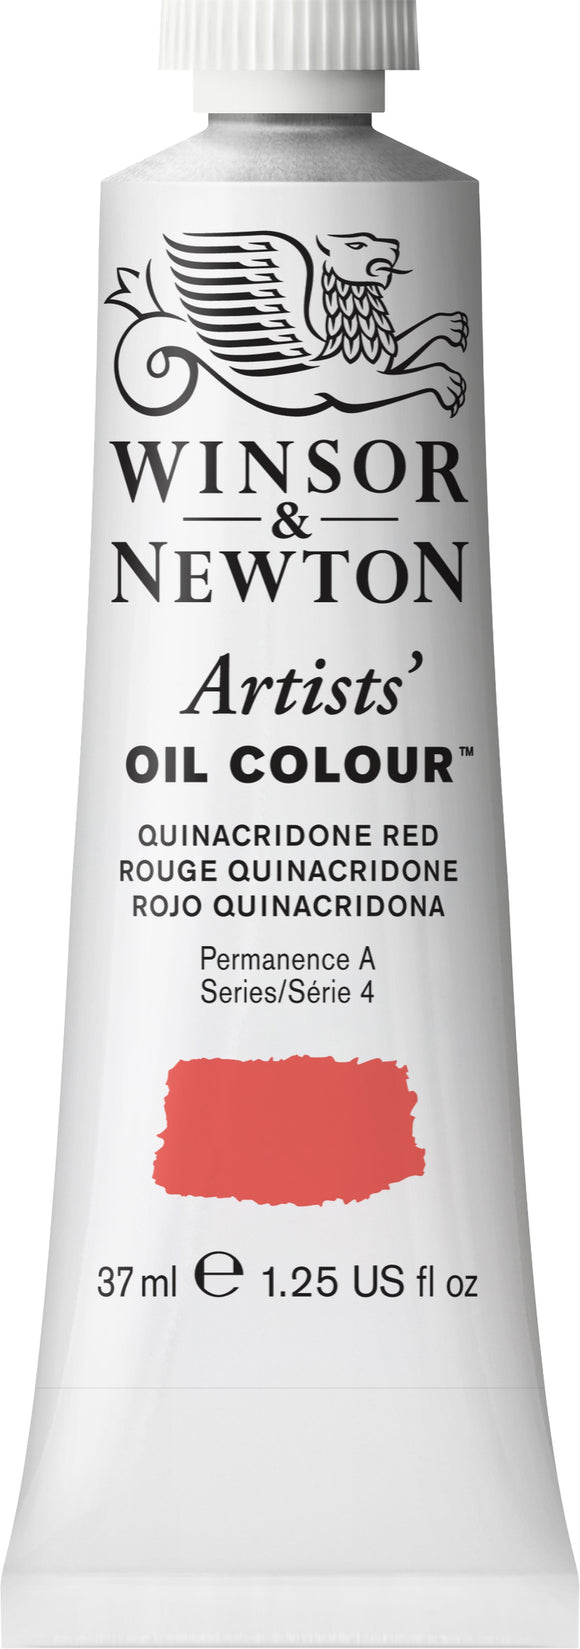 Winsor & Newton Artists Oil Color Quinacridone Red 37Ml